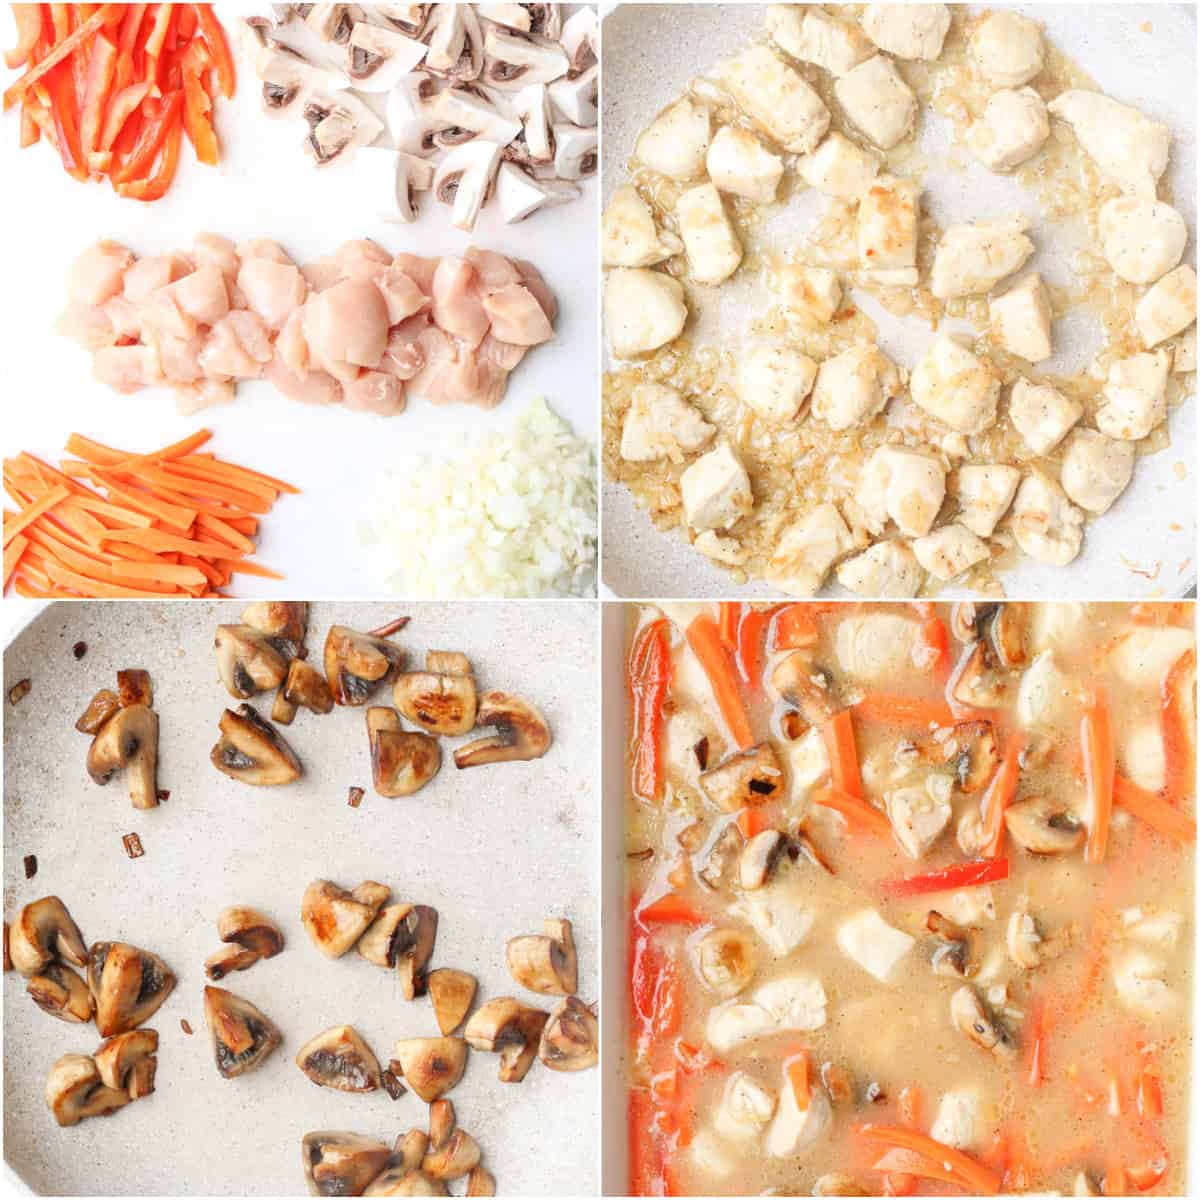 Step by step image collage on how to make baked chicken and rice.